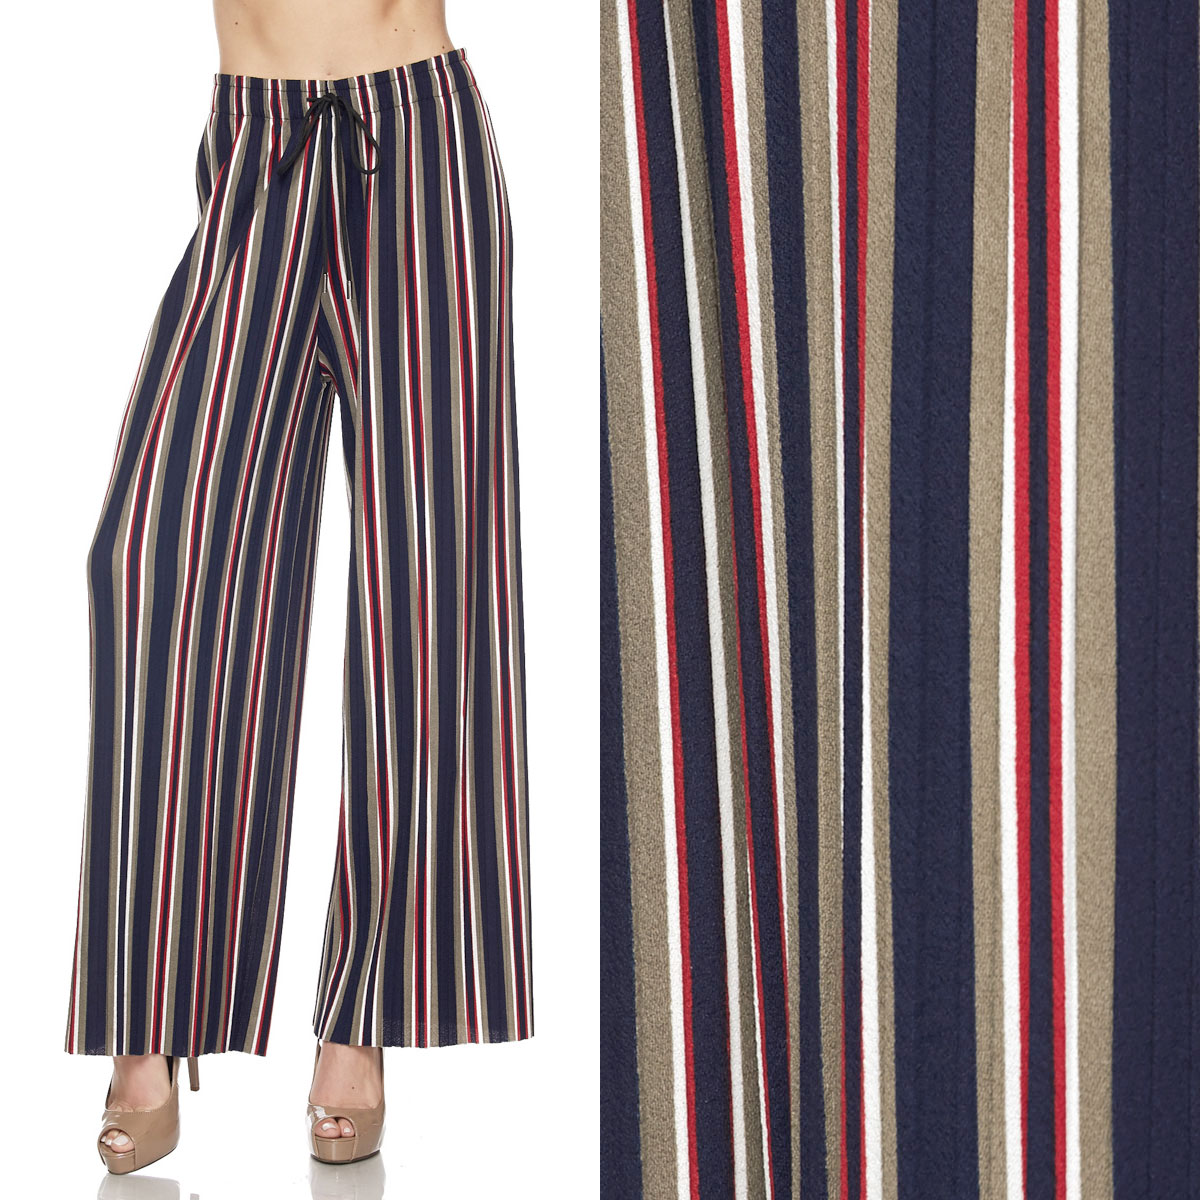 902ANP - Pleated Wide Leg Twill Pants PLUS #05 Striped Navy-Taupe-Red  